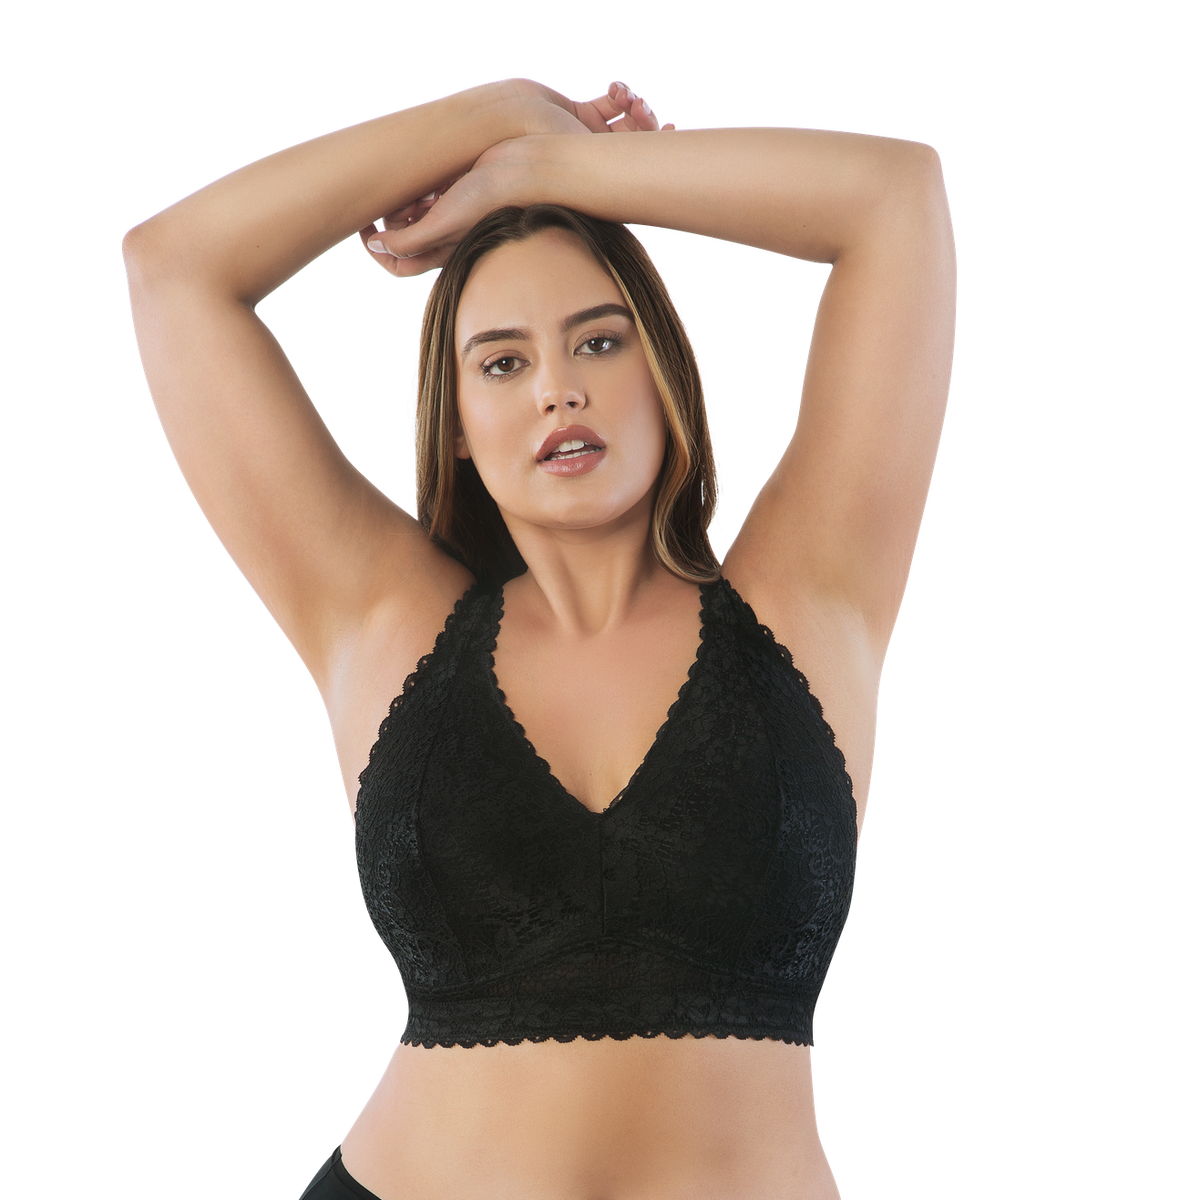 Adriana lace bralette – The Pencil Test